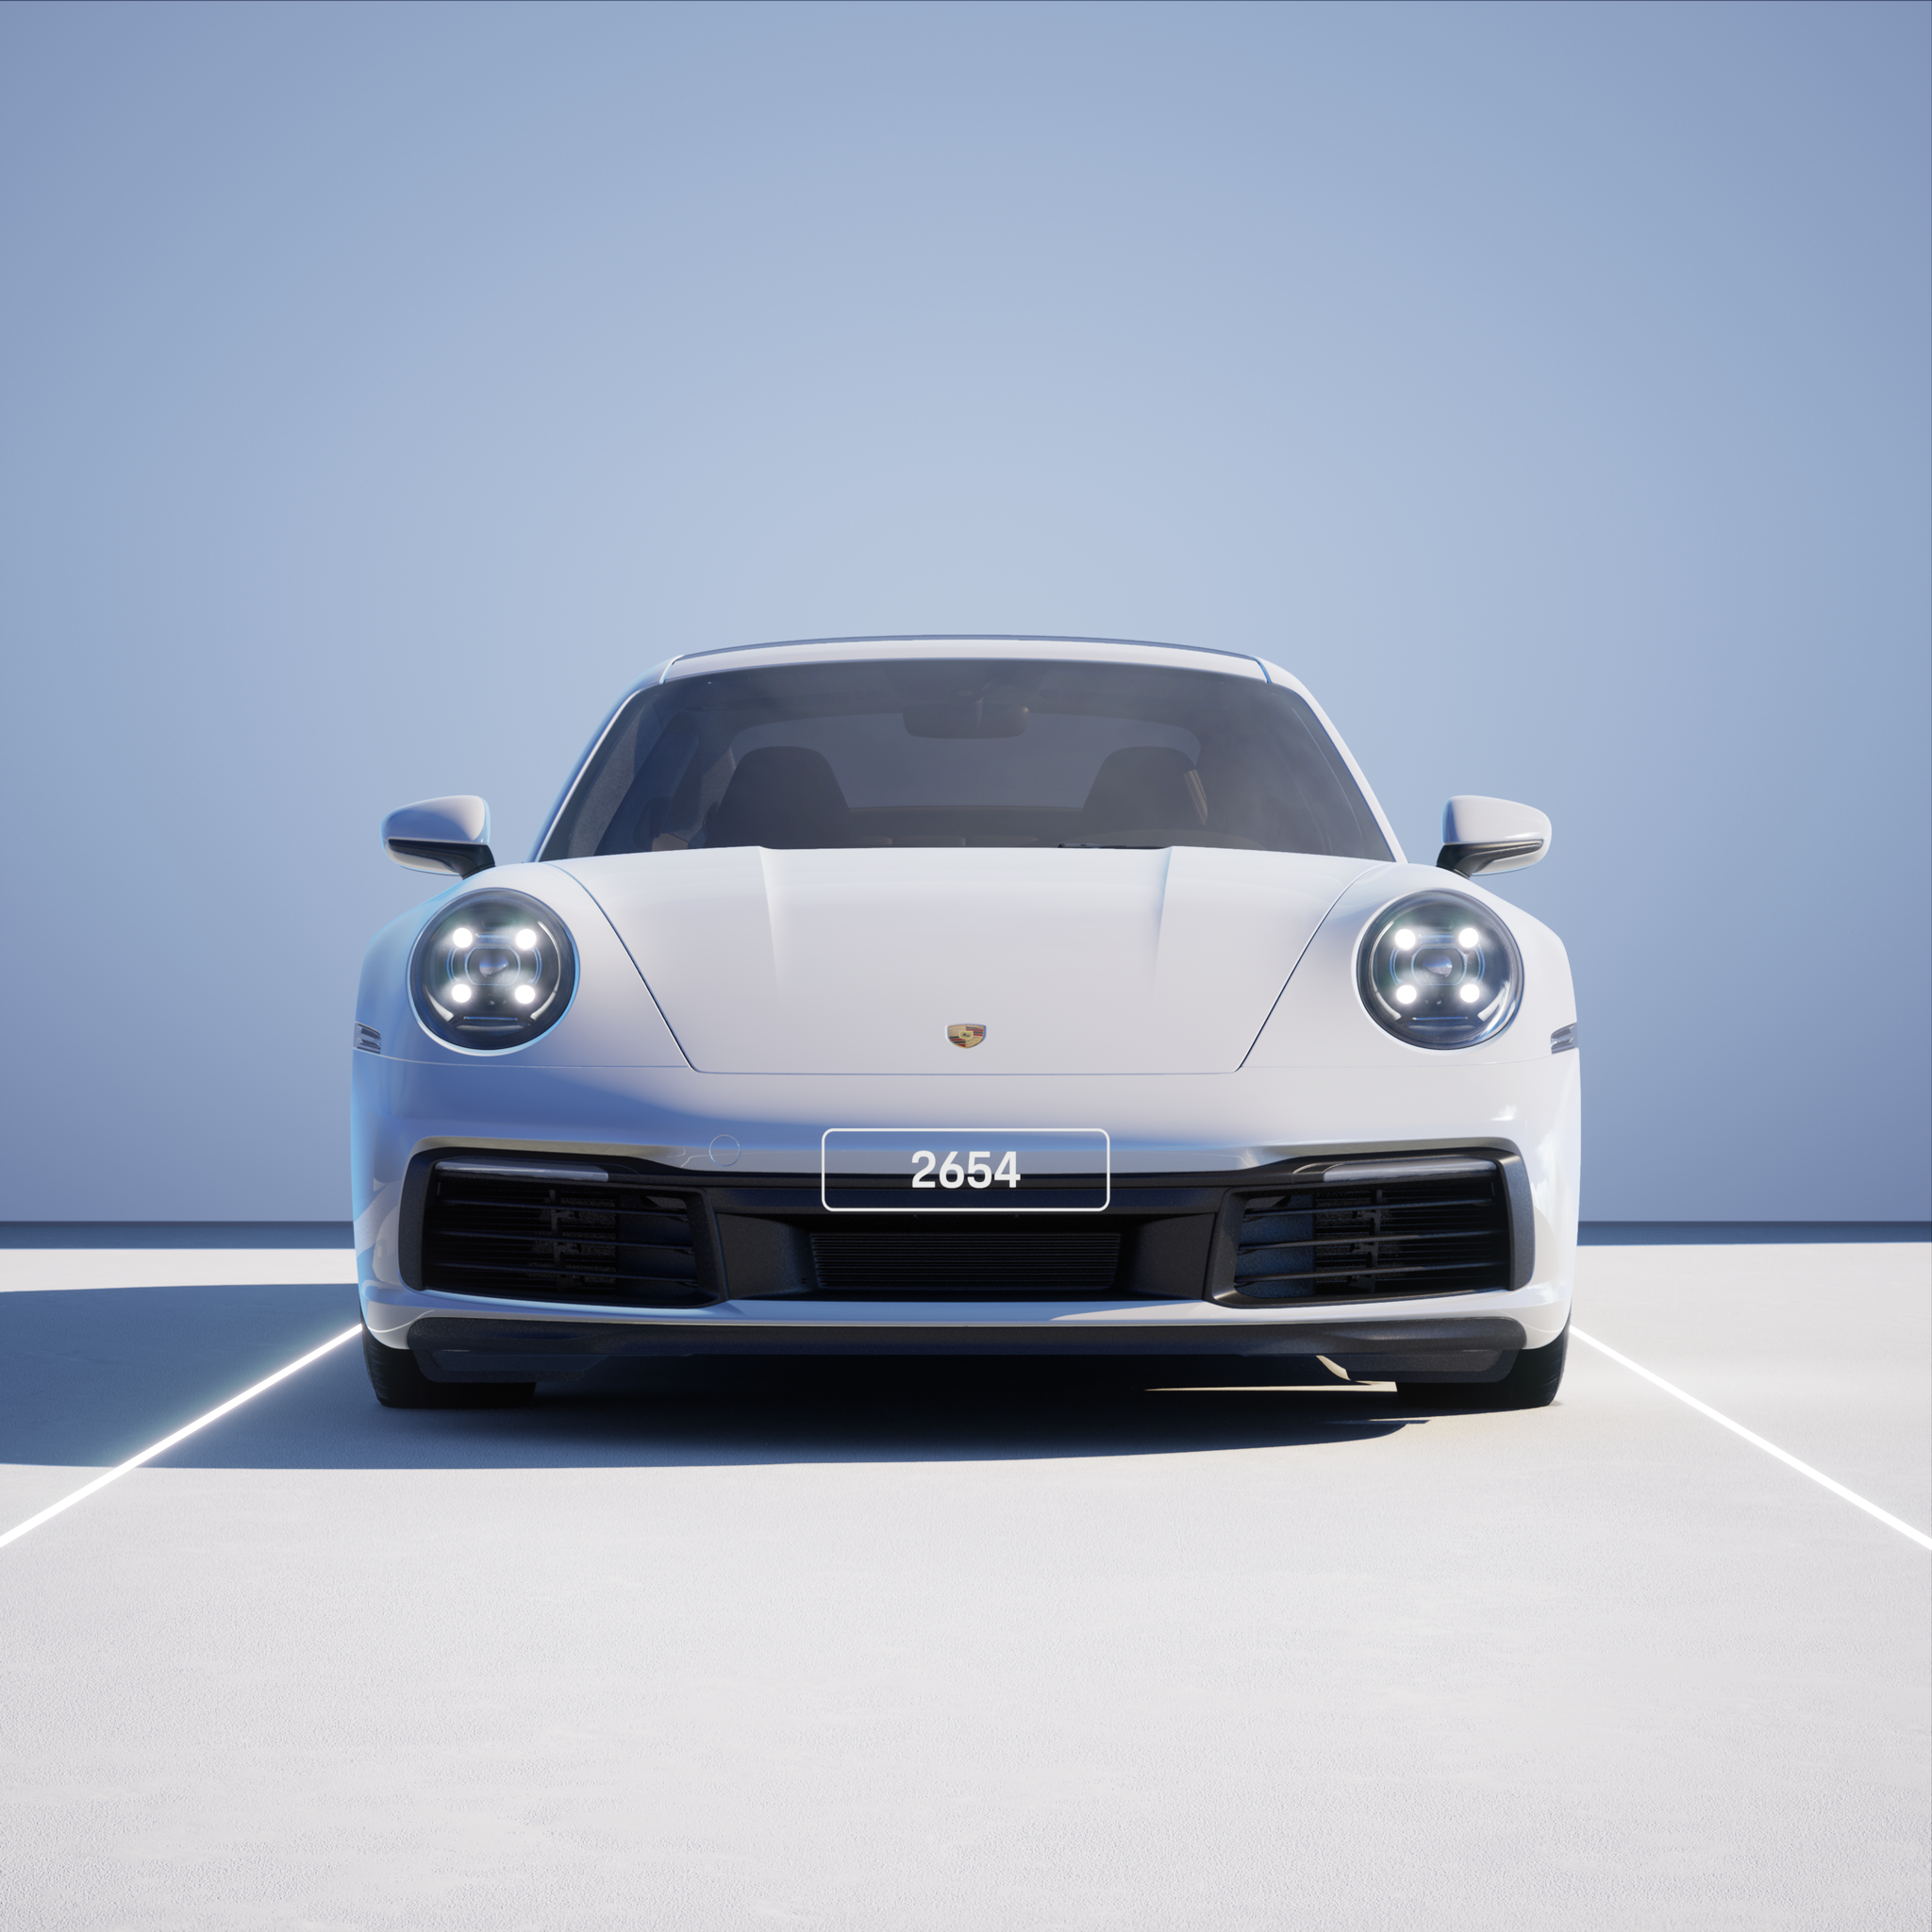 The PORSCHΞ 911 2654 image in phase